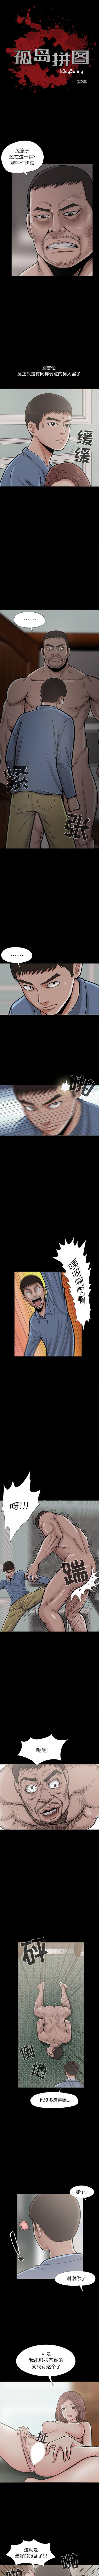 Boquete 孤島拼圖 1-28 Step Brother - Page 10